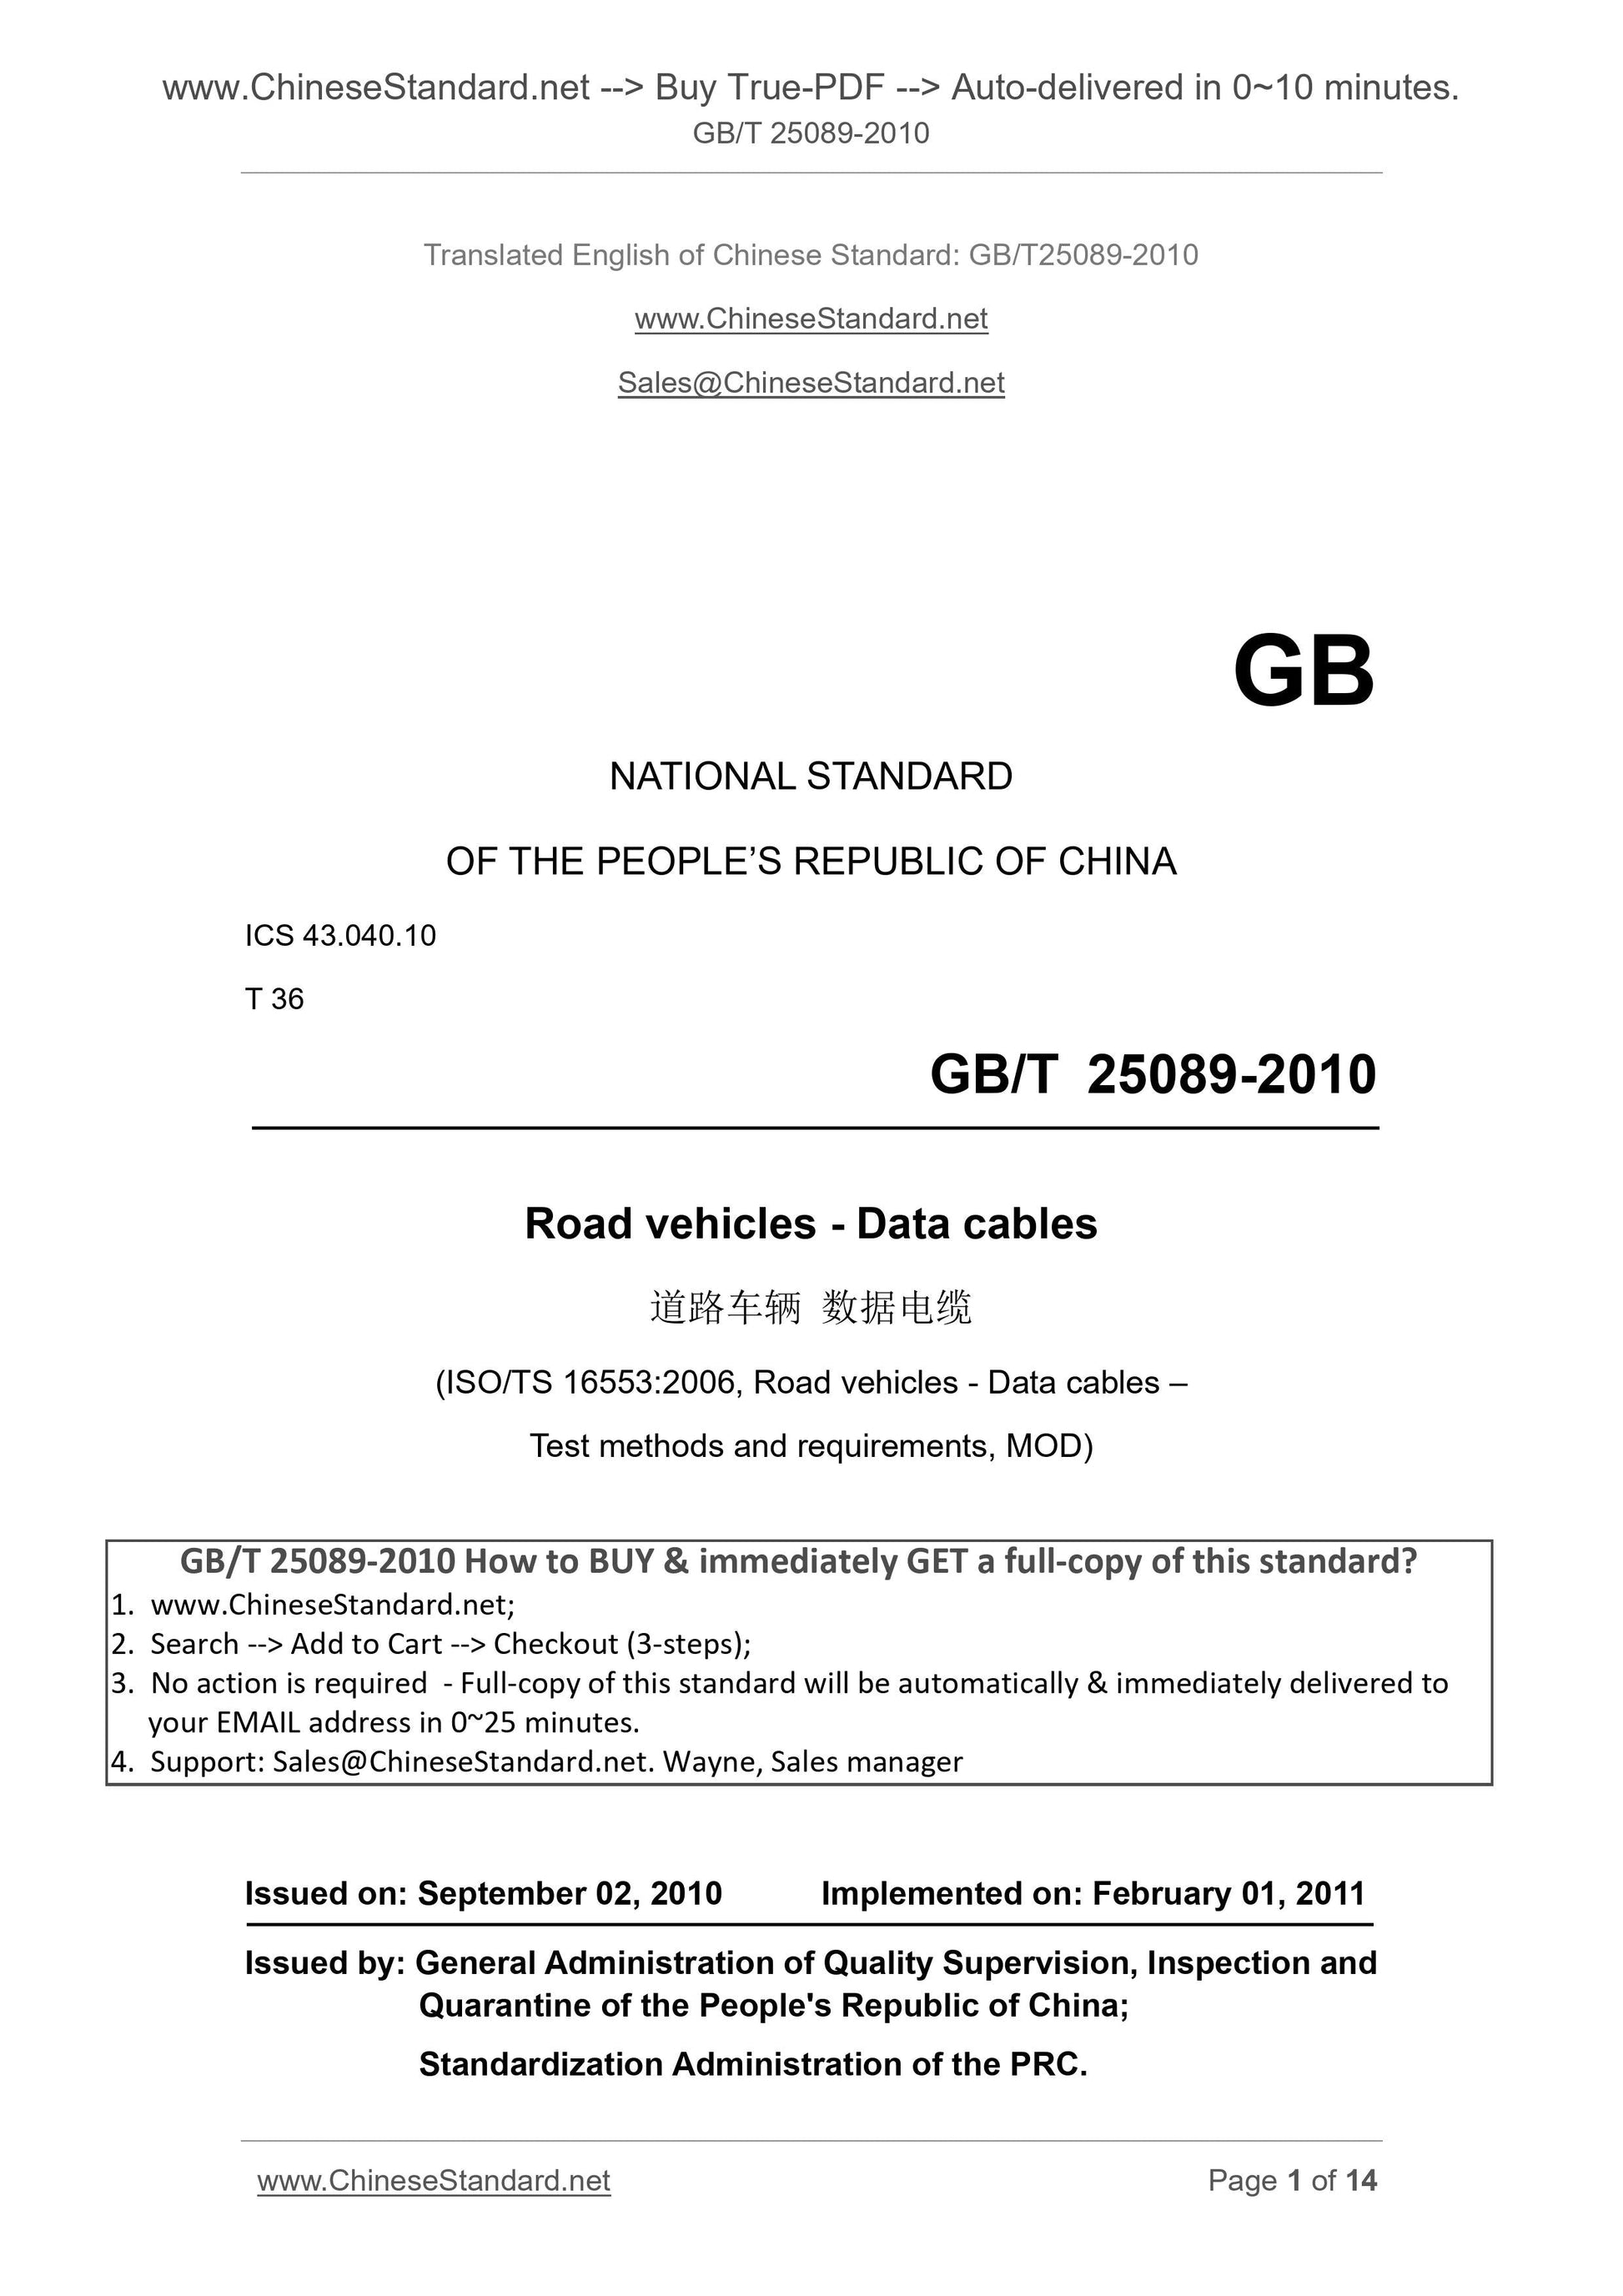 GB/T 25089-2010 Page 1